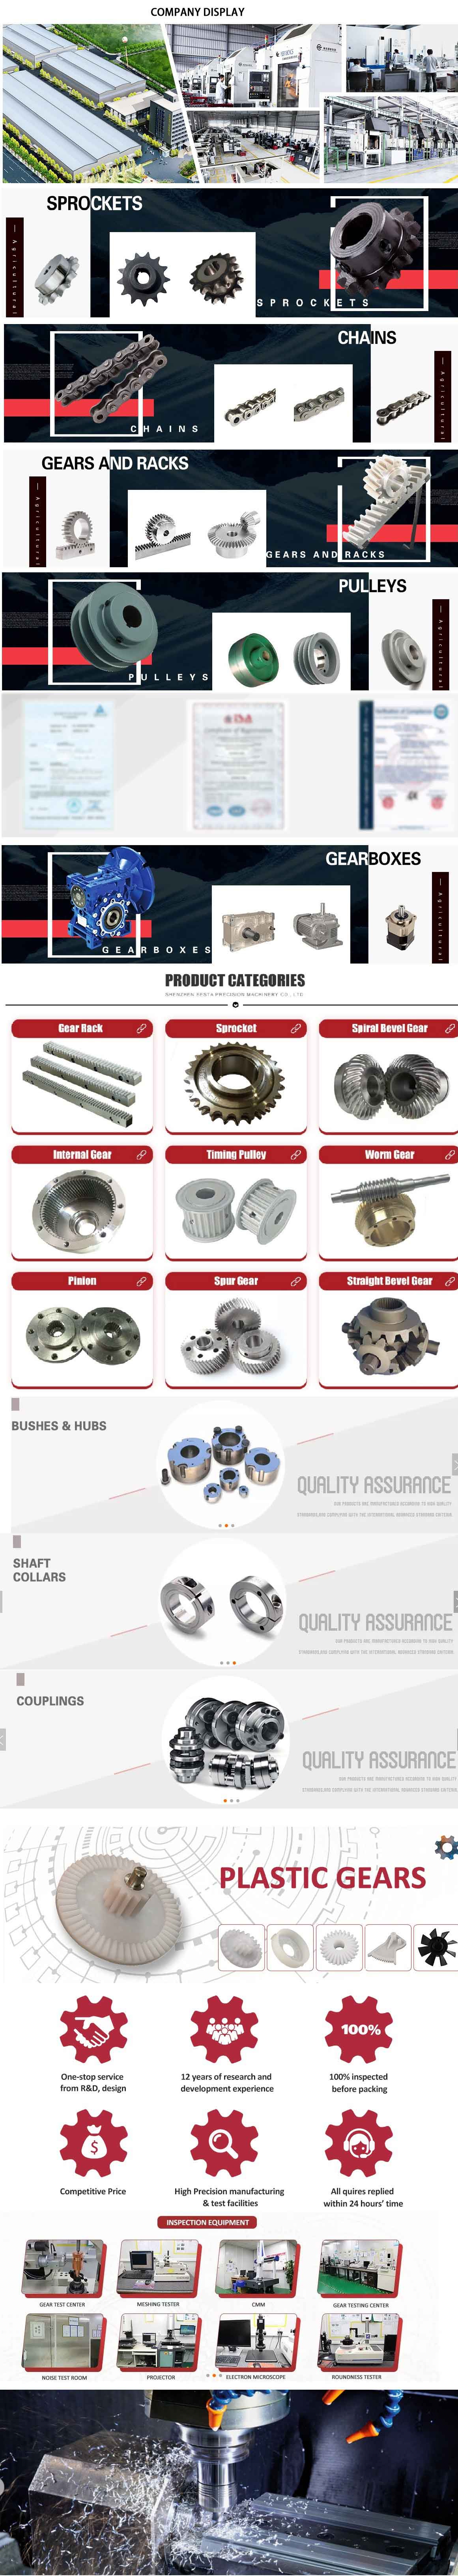 Best  made in China - replacement parts - agricultural gearbox manufacturer in China 1300t   long tiller gearbox   Allahabad India   New Cold Chamber Aluminum Die Casting Machine Manufacturers with ce certificate top quality low price suitable for Tractor, Agricultural machines, right angle pto shaft drive 